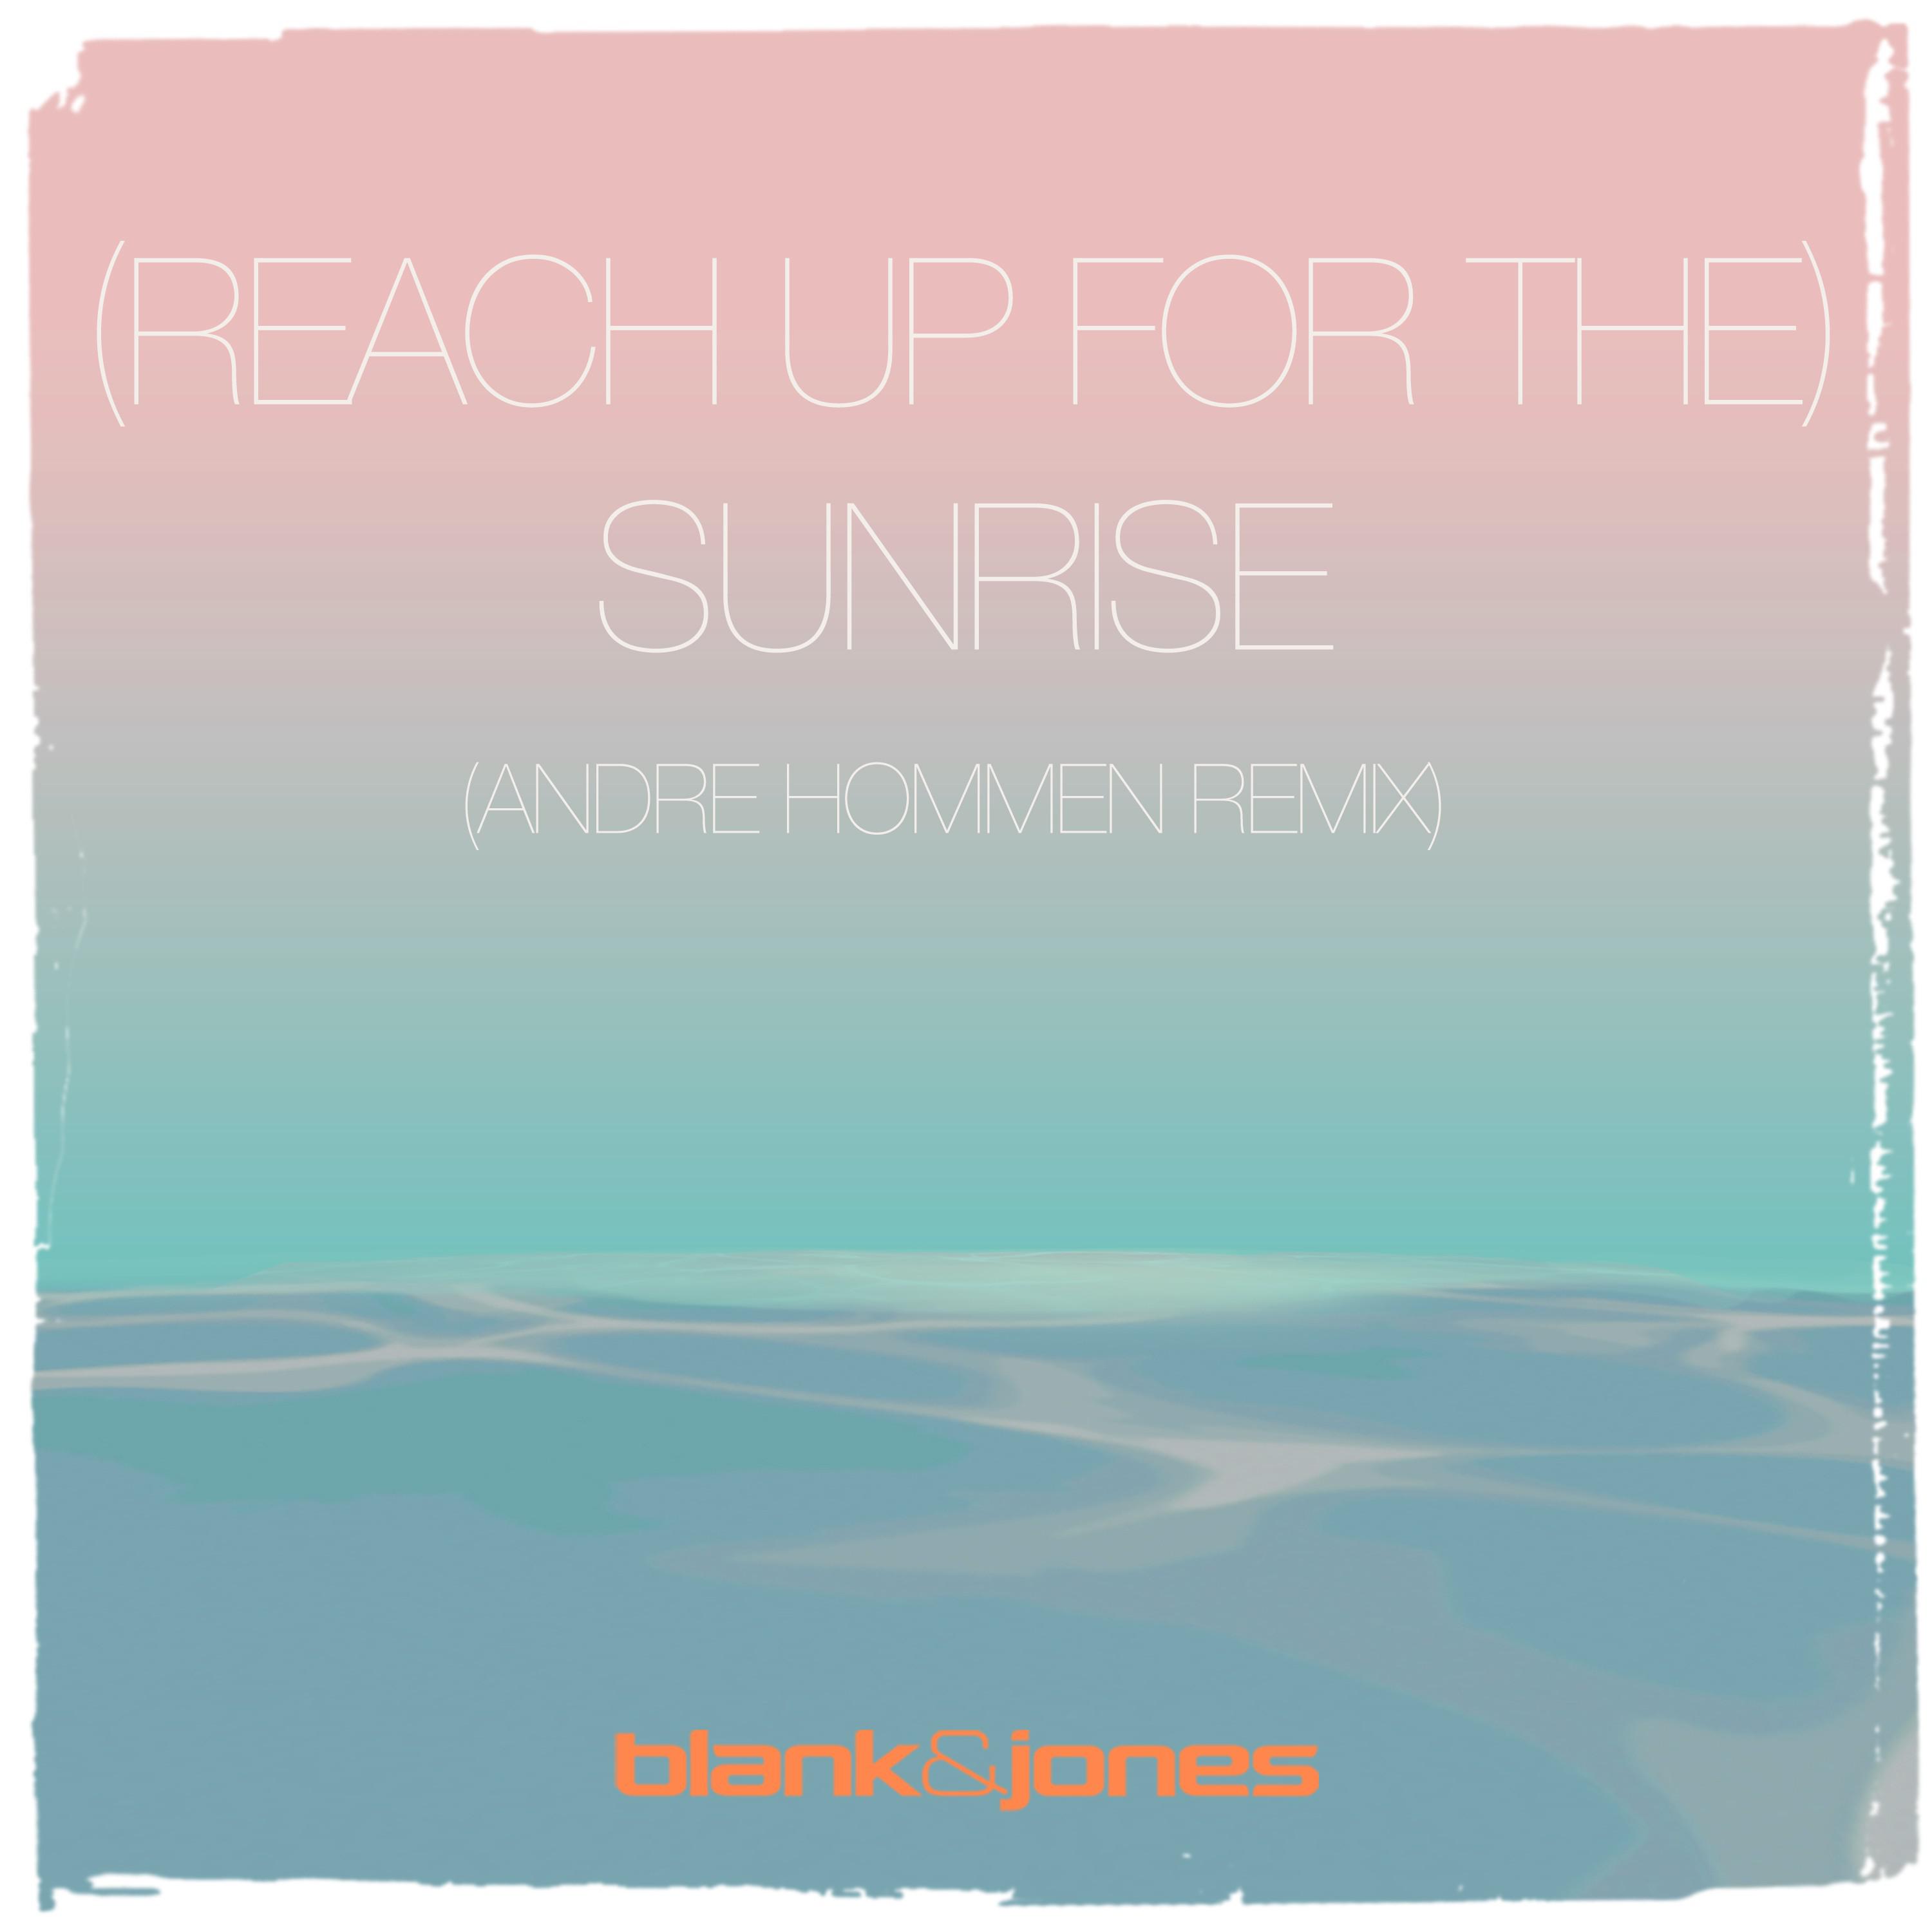 (Reach up for The) Sunrise专辑